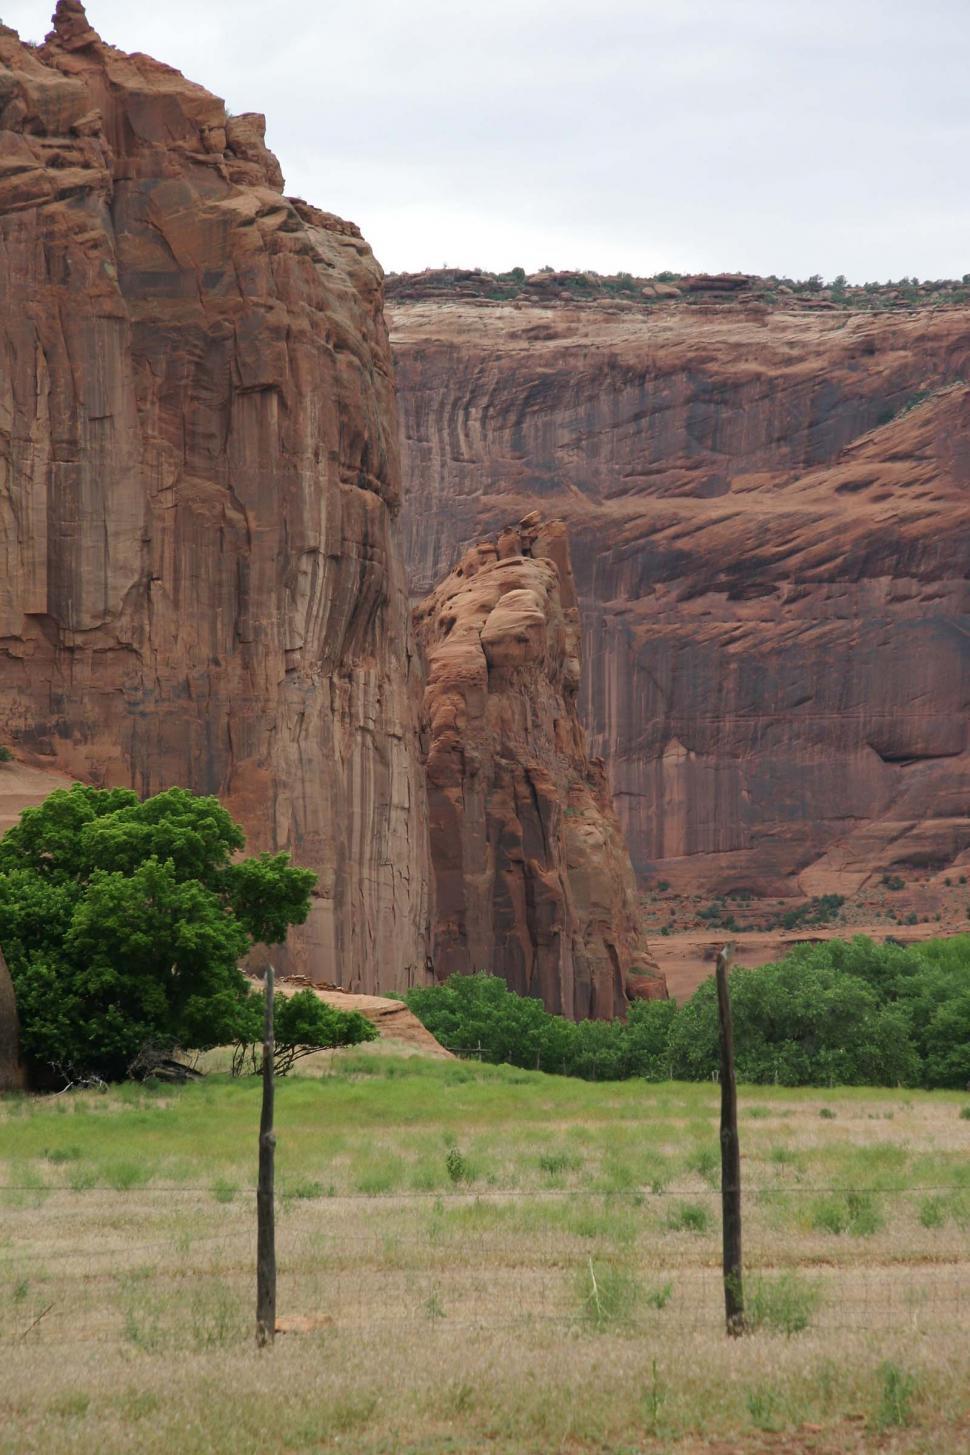 Free Image of cliff cliffs canyon de chelly chelly canyon de arizona indian native american monument national navajo southwest field grasslands pasture fence barbed wire floor 